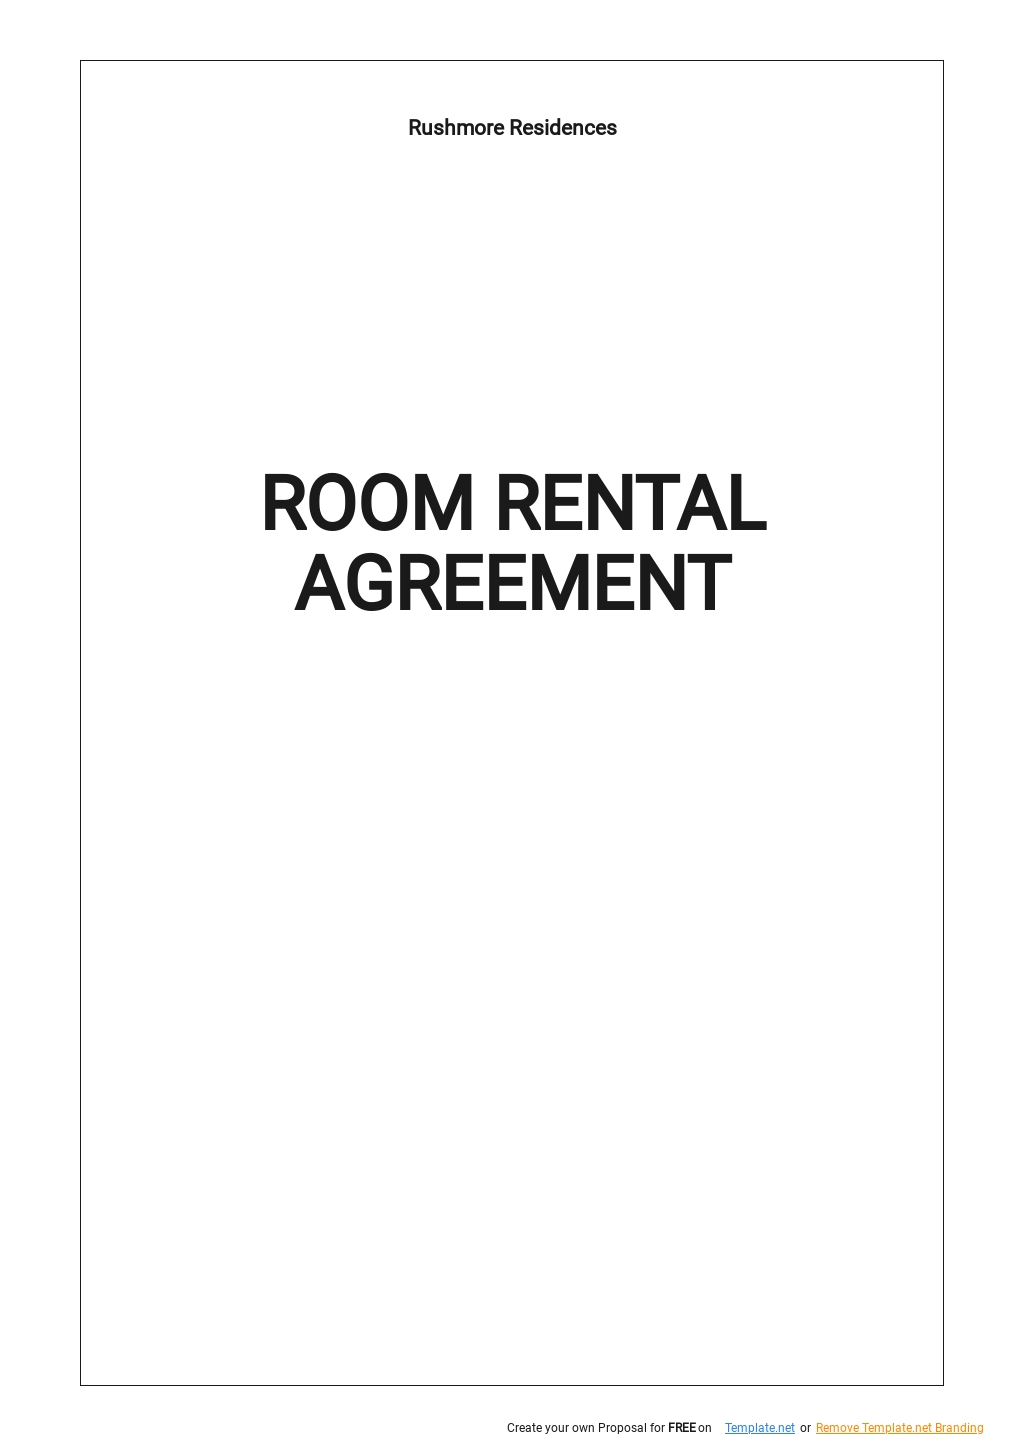 chat-room-agreement-template-google-docs-word-template